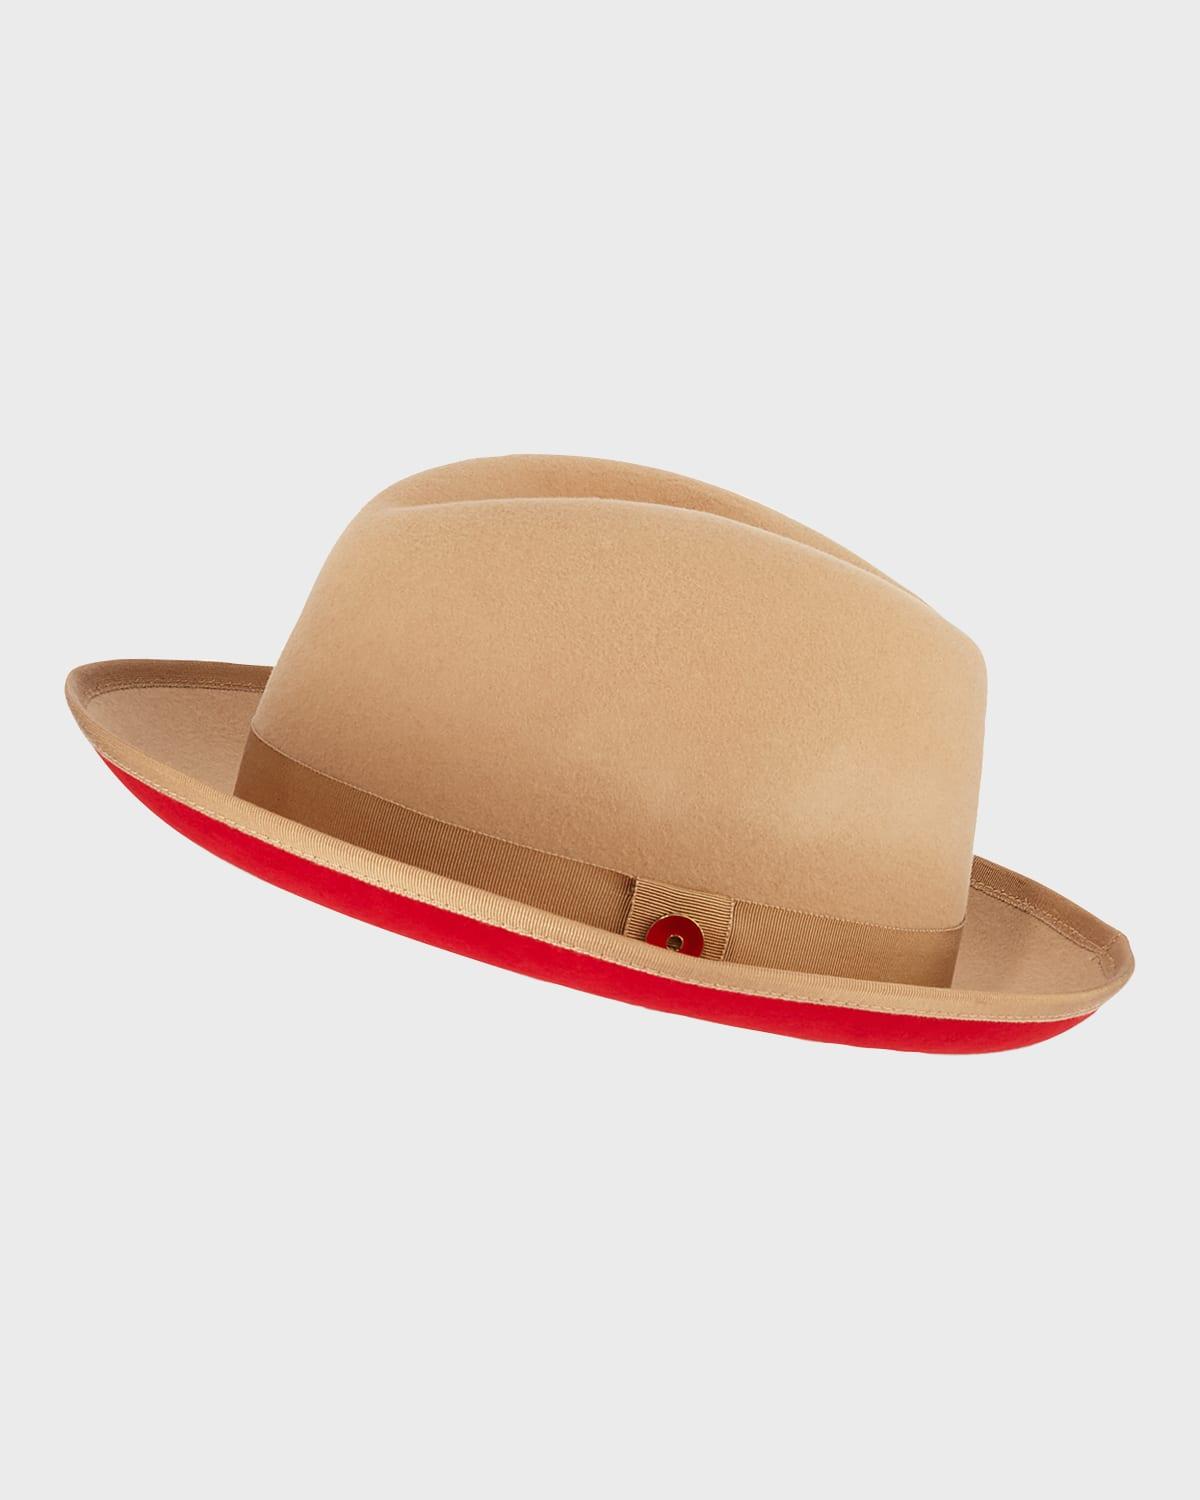 Keith James King Fedora Hat in Natural for Men | Lyst